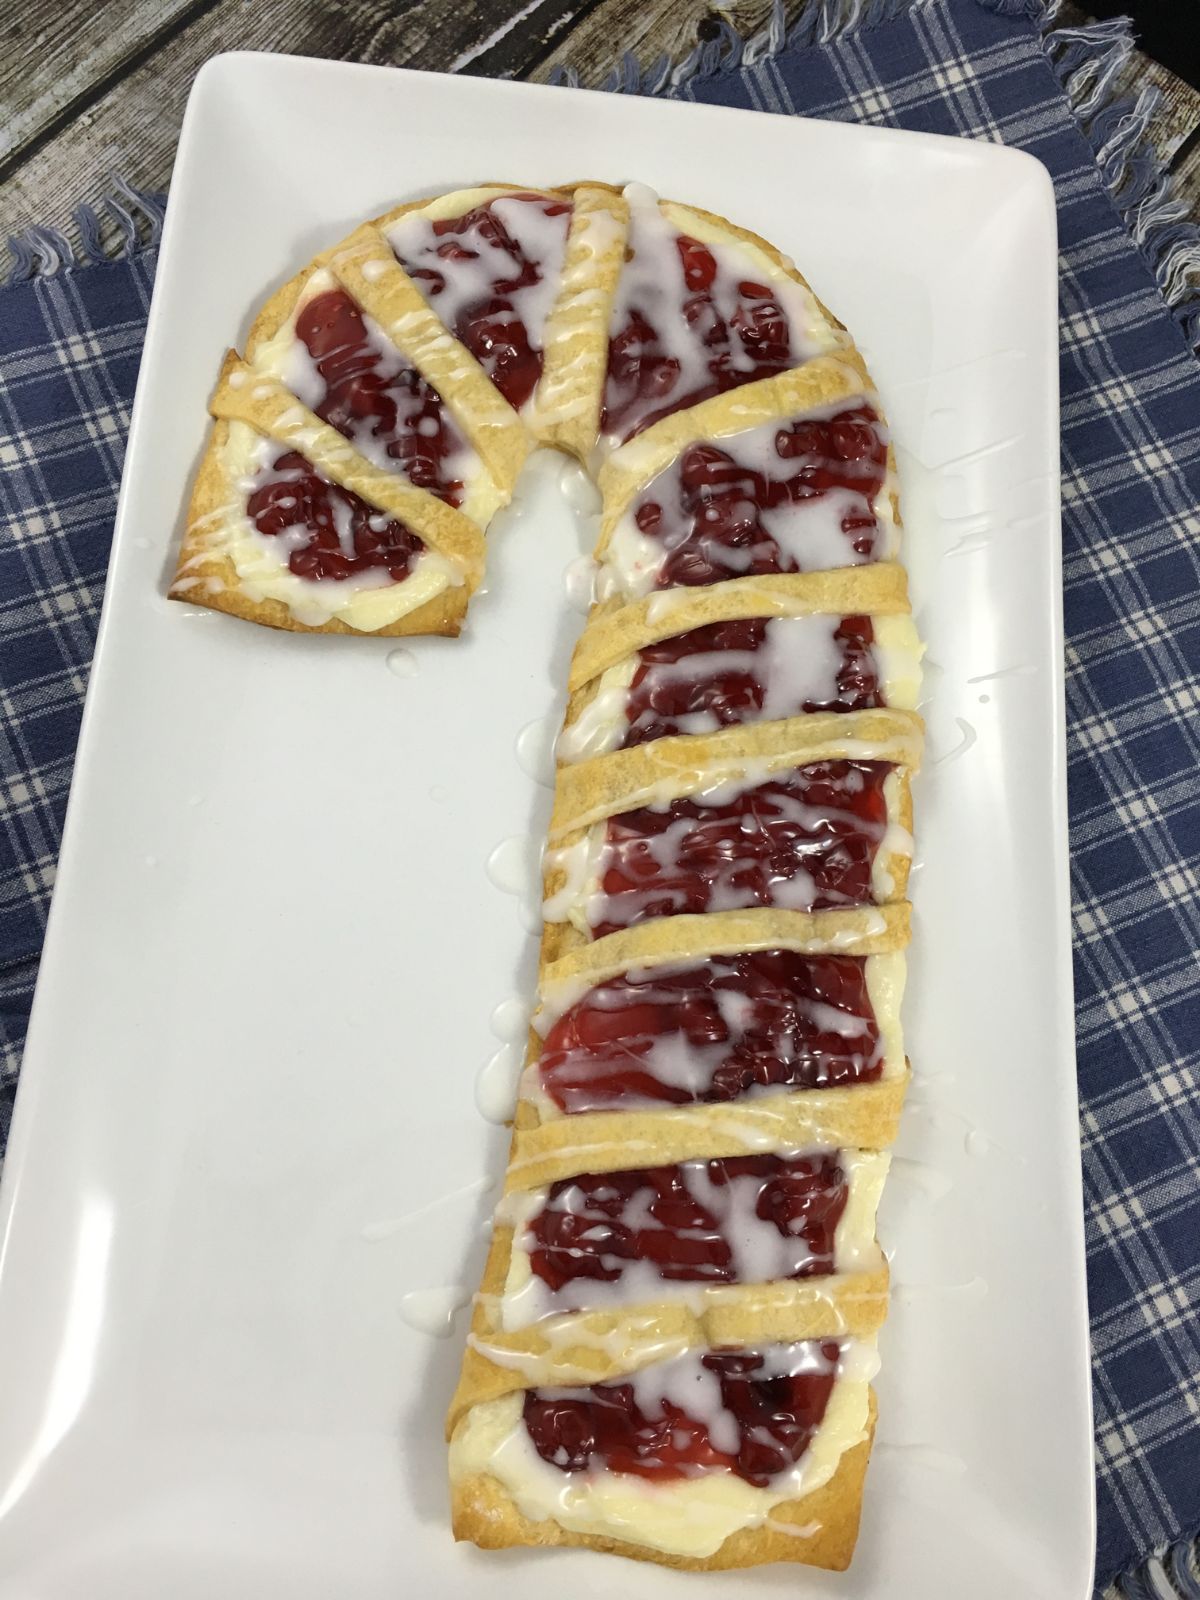 candy cane crescent roll breakfast pastry.